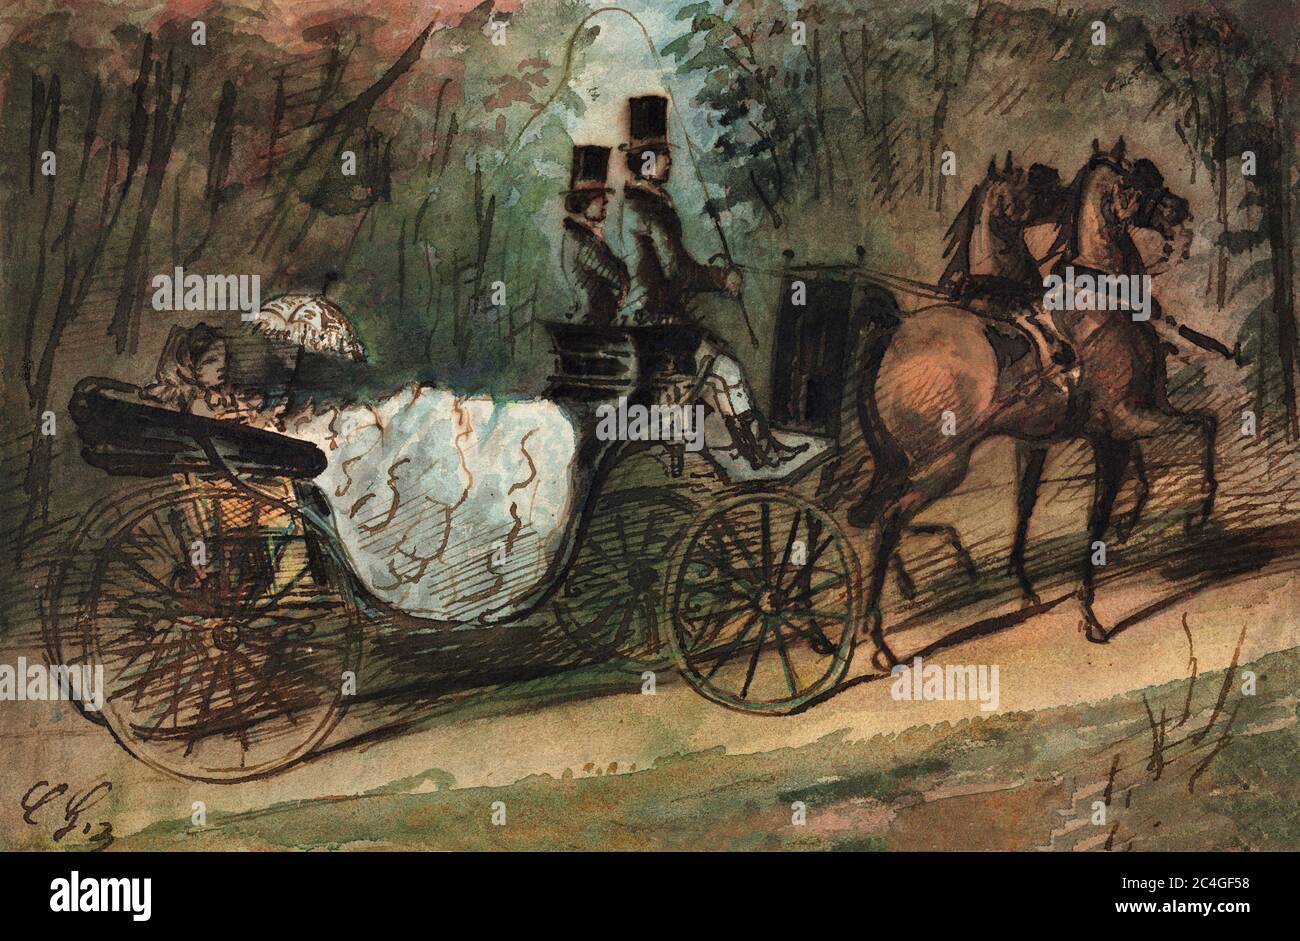 Carriage in the Bois de Boulogne by Constantin Guys, 1800s Stock Photo